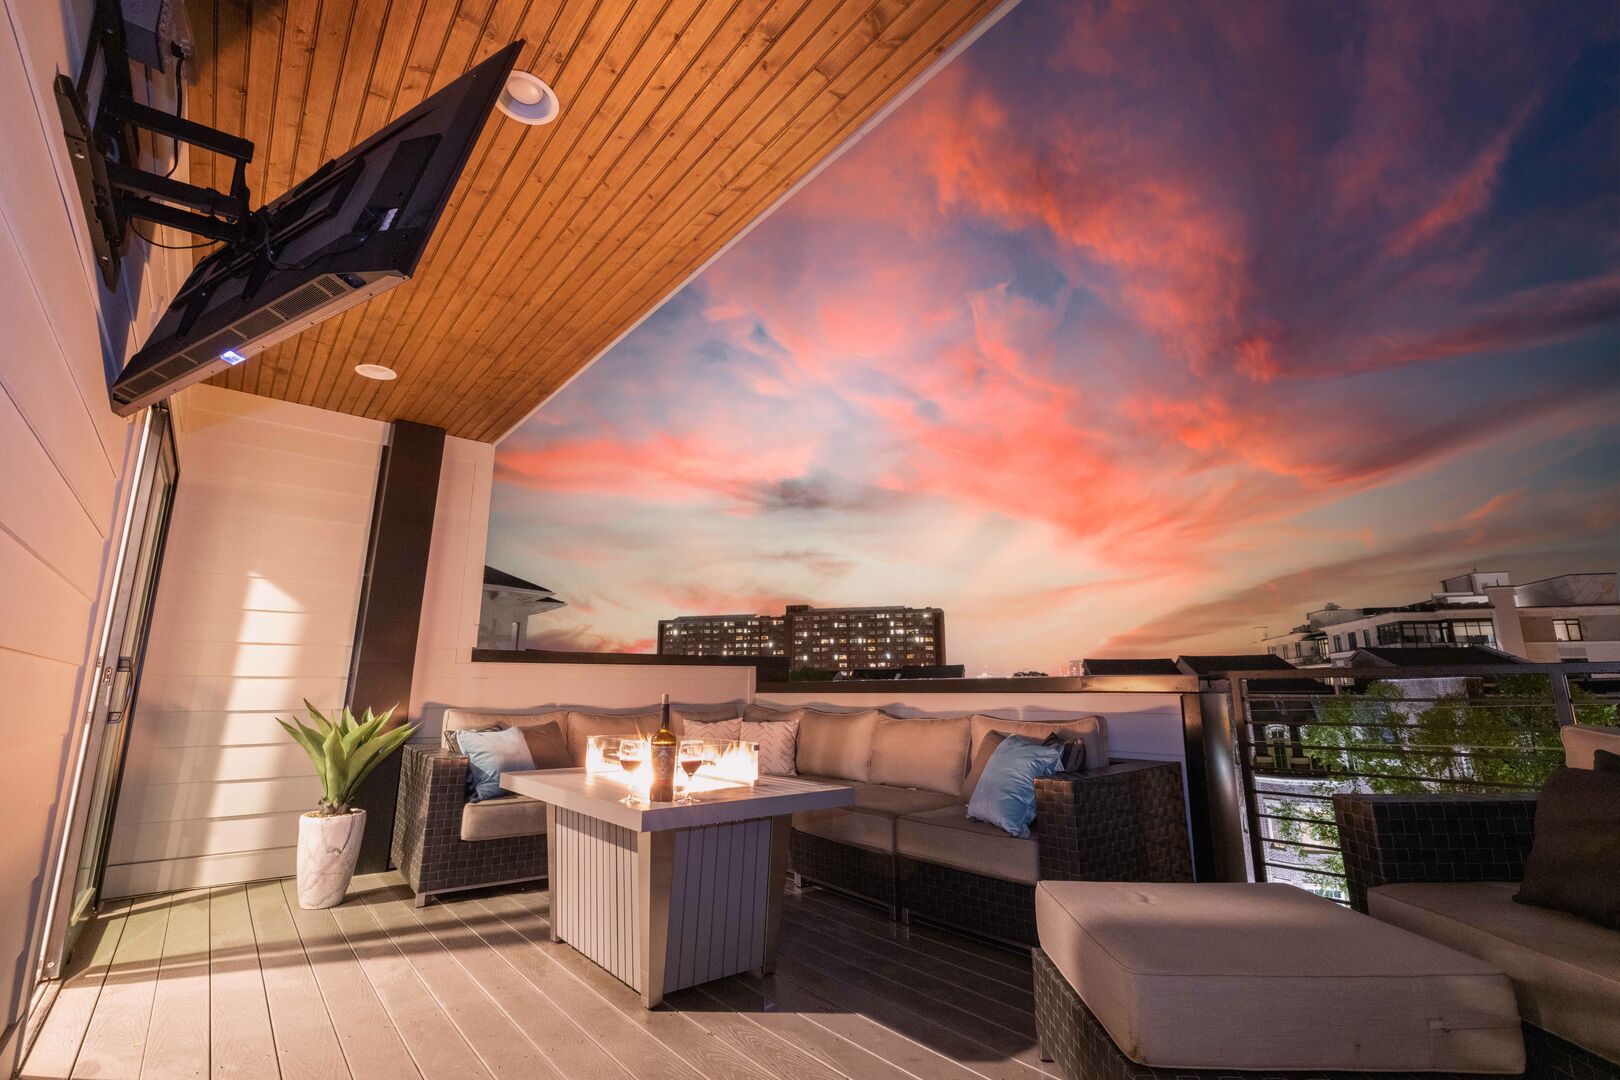 Private outdoor deck with flat screen TV and furnishings